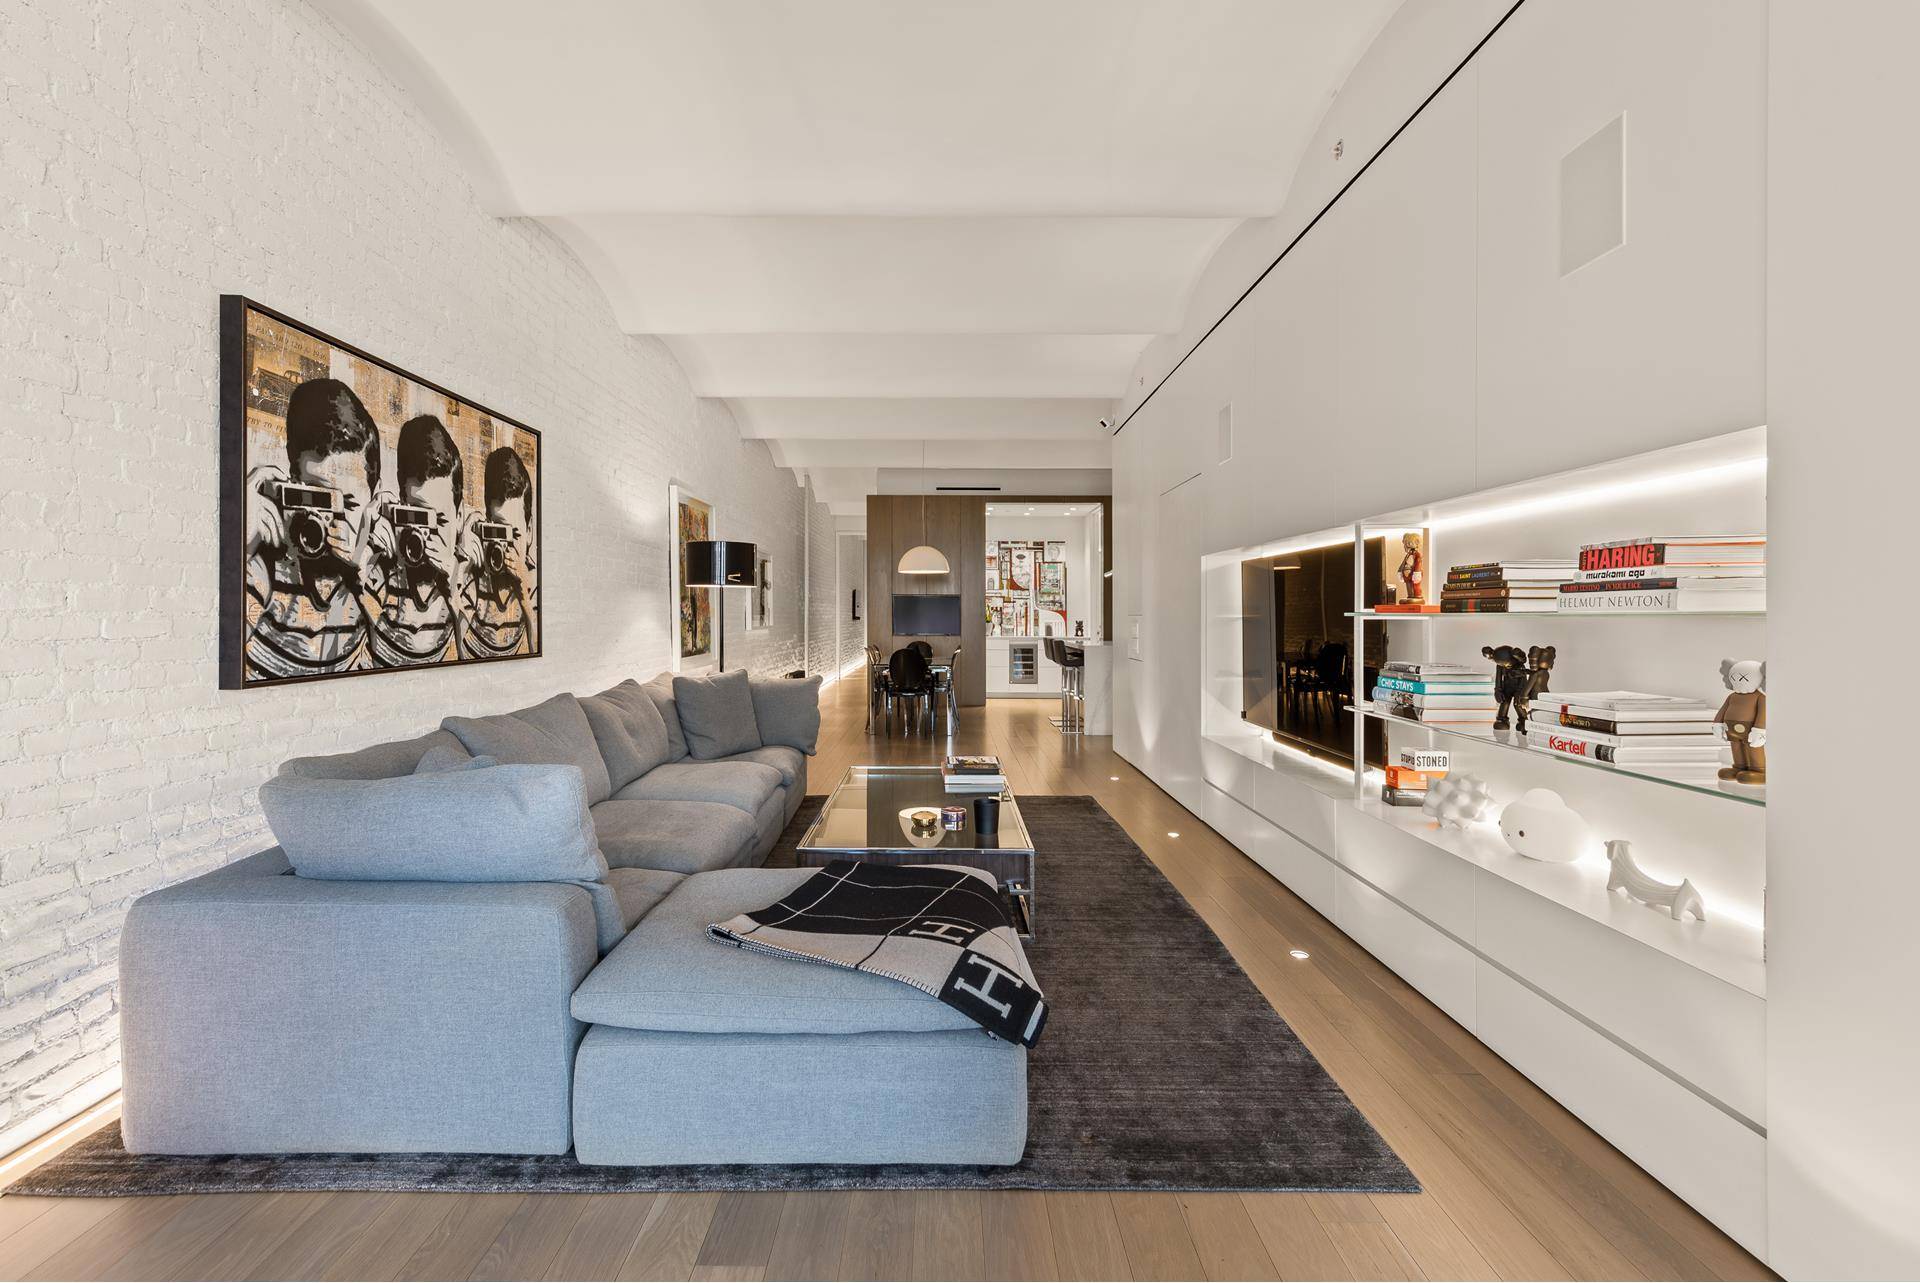 One of a kind opportunity at the distinctive 543 Broadway to purchase a piece of architectural history that has been transformed into residential luxury.